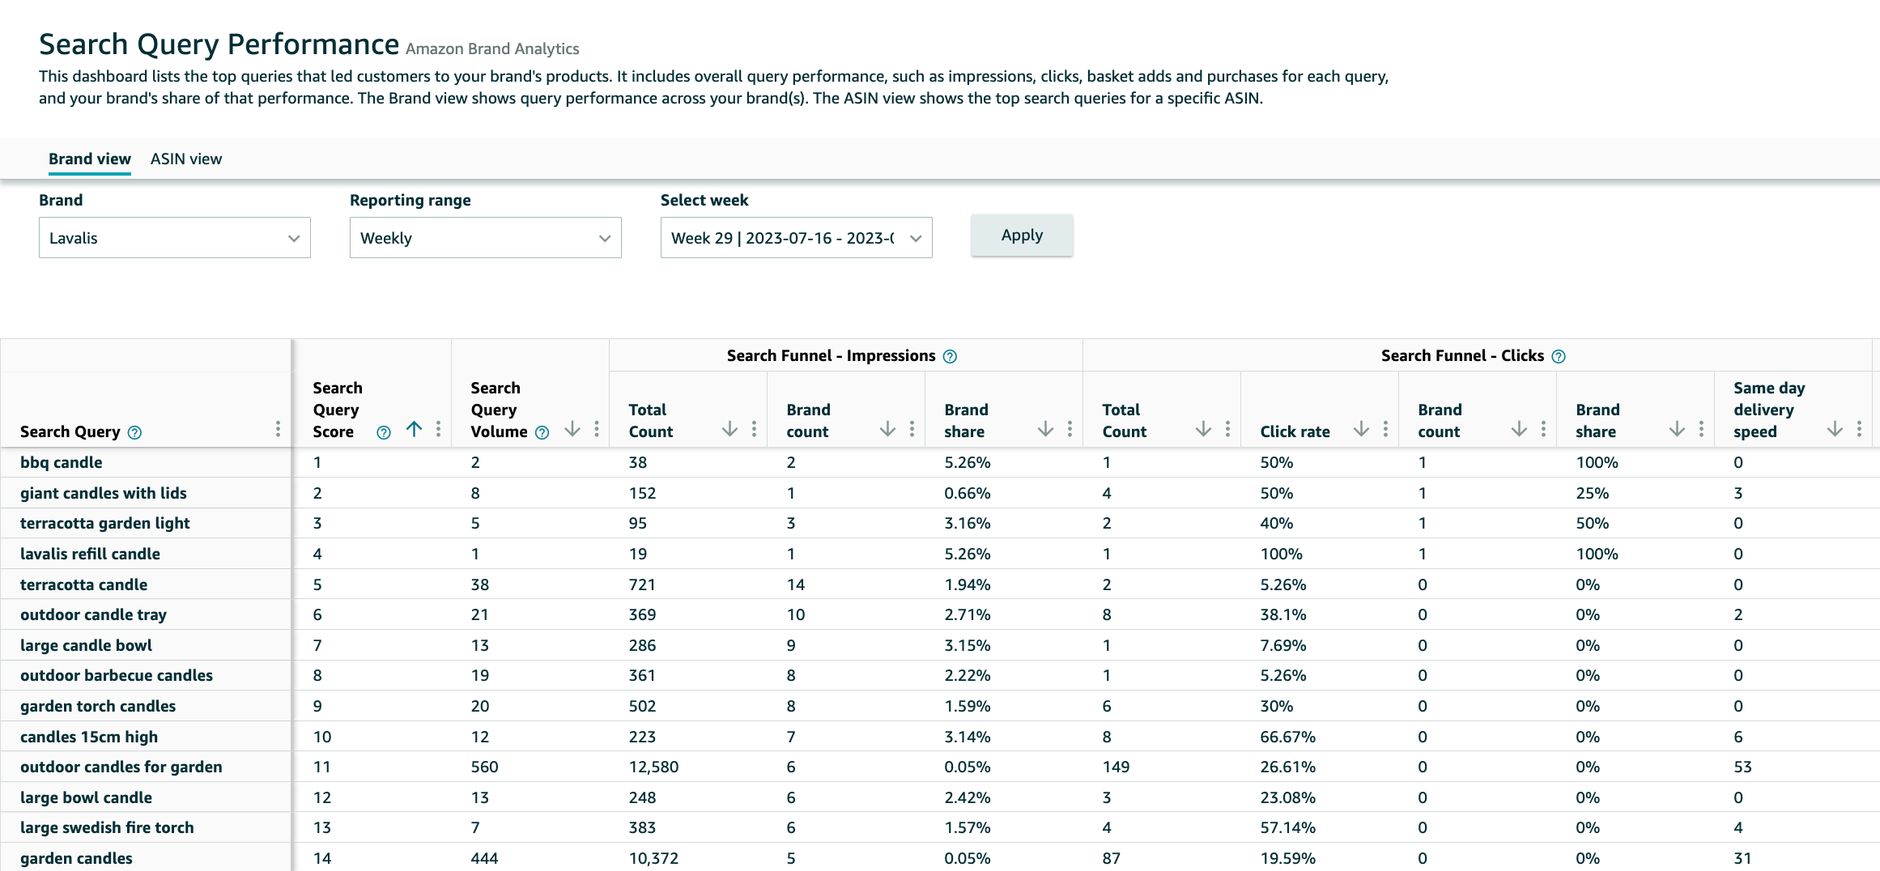 Overview of the Search Query Performance Report